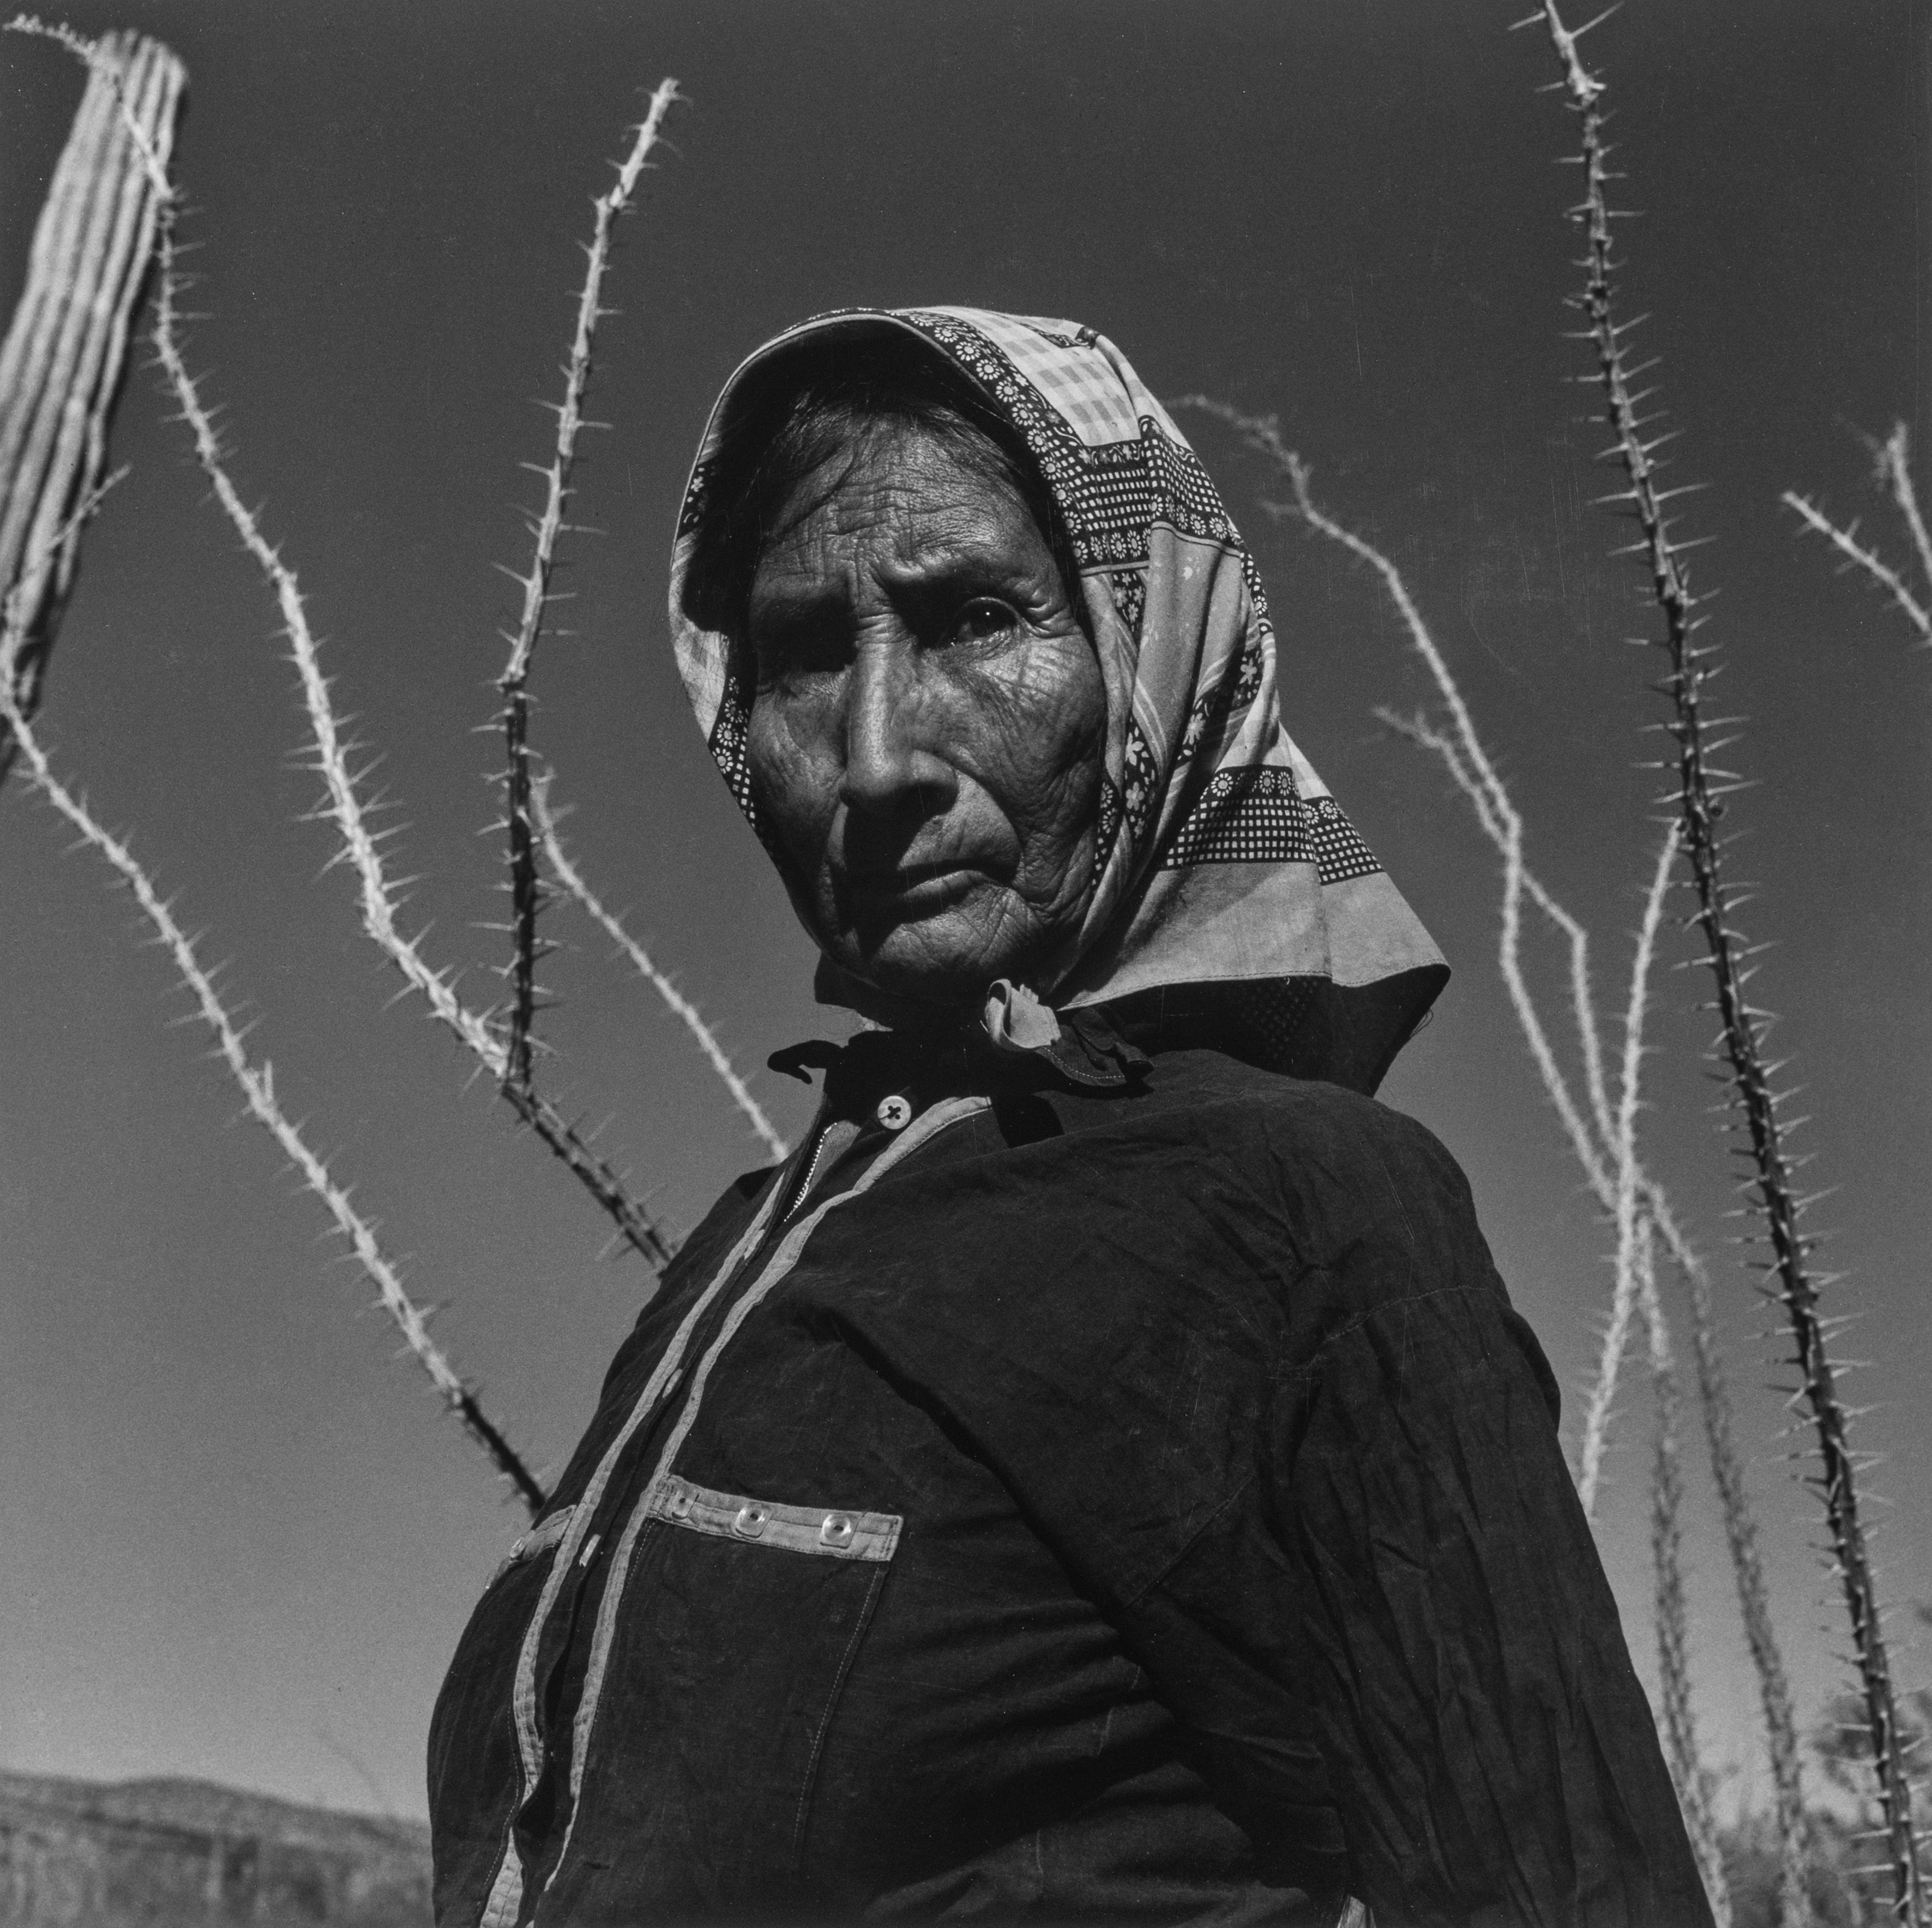 Juchitán De Las Mujeres, 1979 - Graciela Iturbide
Signed on reverse
Silver gelatin print
20 x 16 inches

Graciela Iturbide’s photography turns on themes of spirituality, ritual, and folk and religious symbolism, often incorporating a strong social